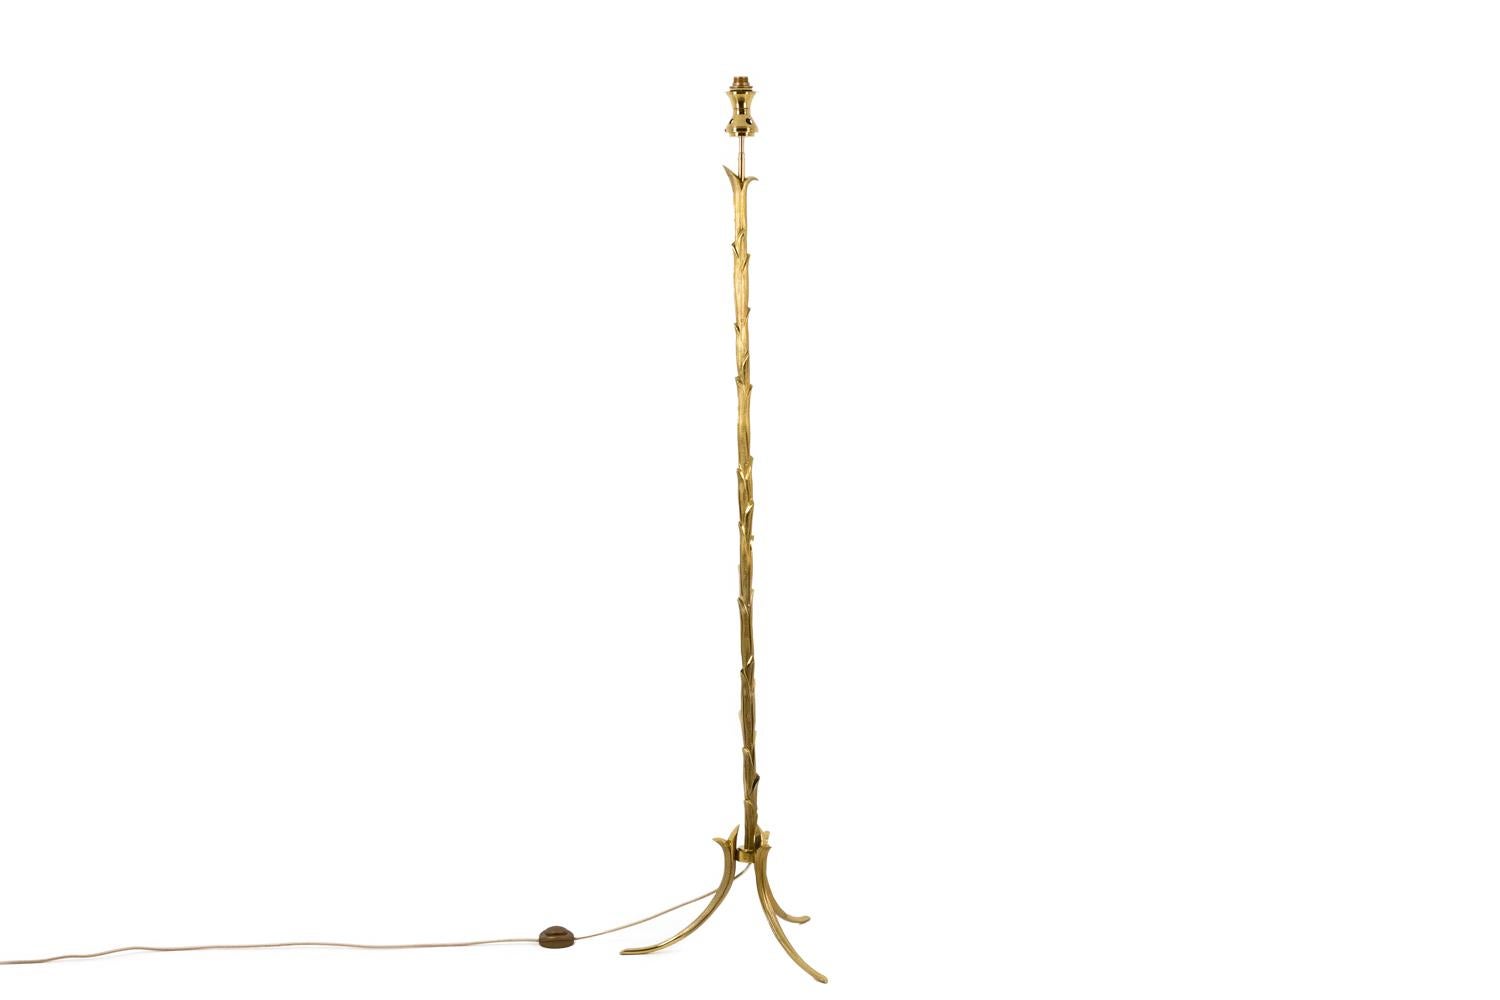 Maison Charles, edited by.

Floor lamp in gilded bronze, from the Maison Charles, Palm Tree model, resting on three curved feet. Barrel decorated with pieces of chiseled gilded bronze assembled in the form of leaves between openings.

French work